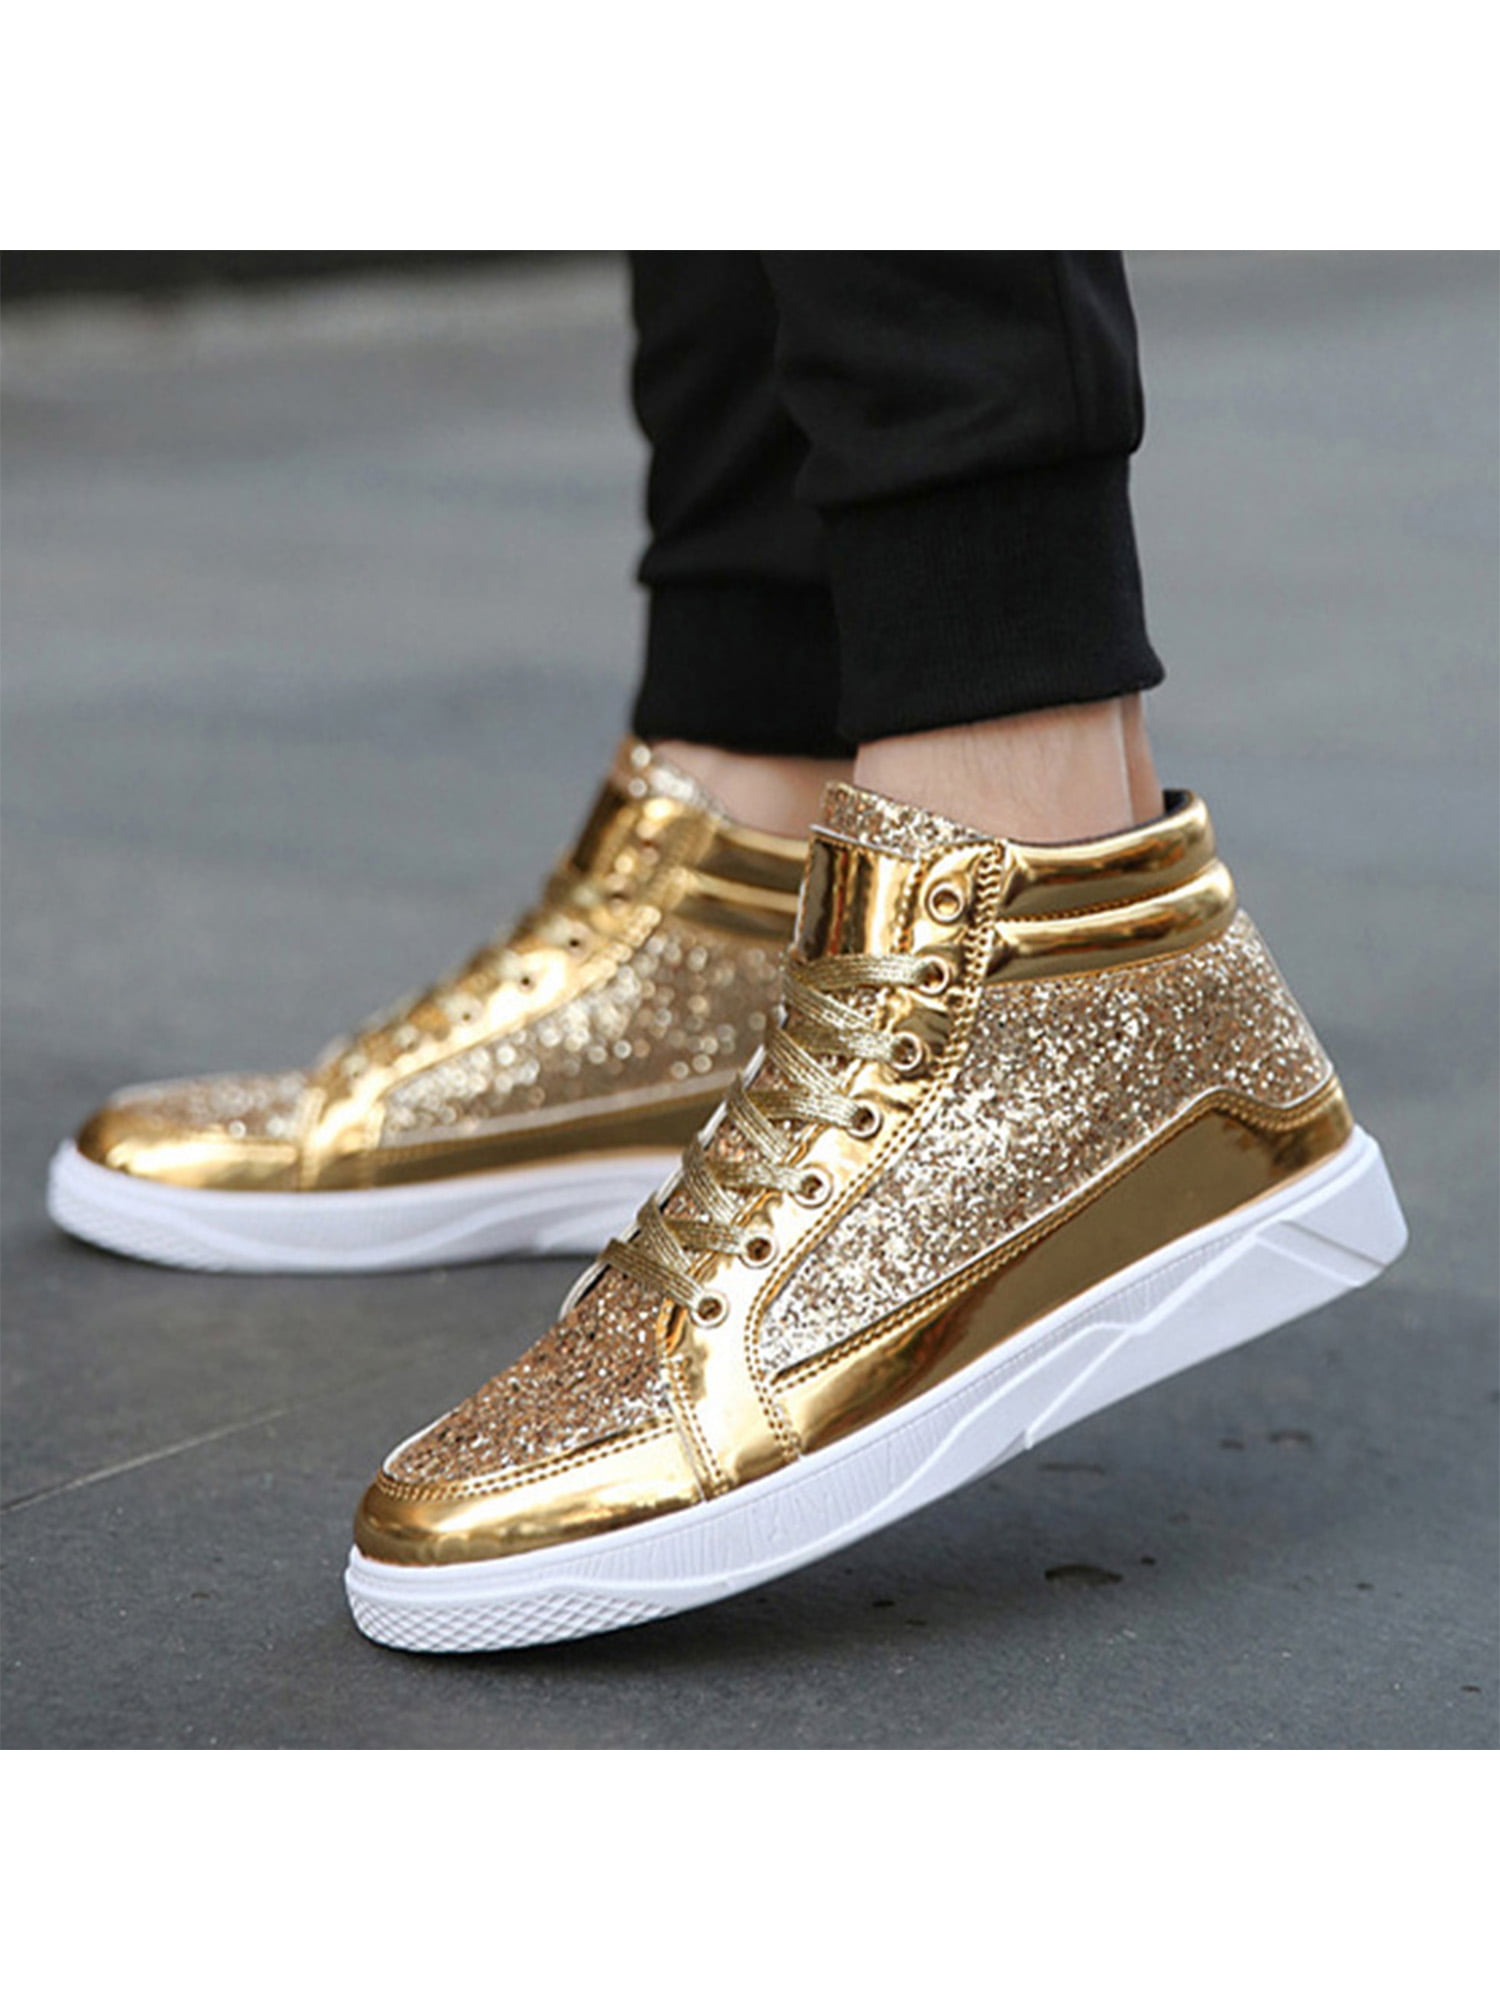 Men's Shoes Fashion High Top Skateboard Bling Bling Lace Up Rivets Sneakers Hot 